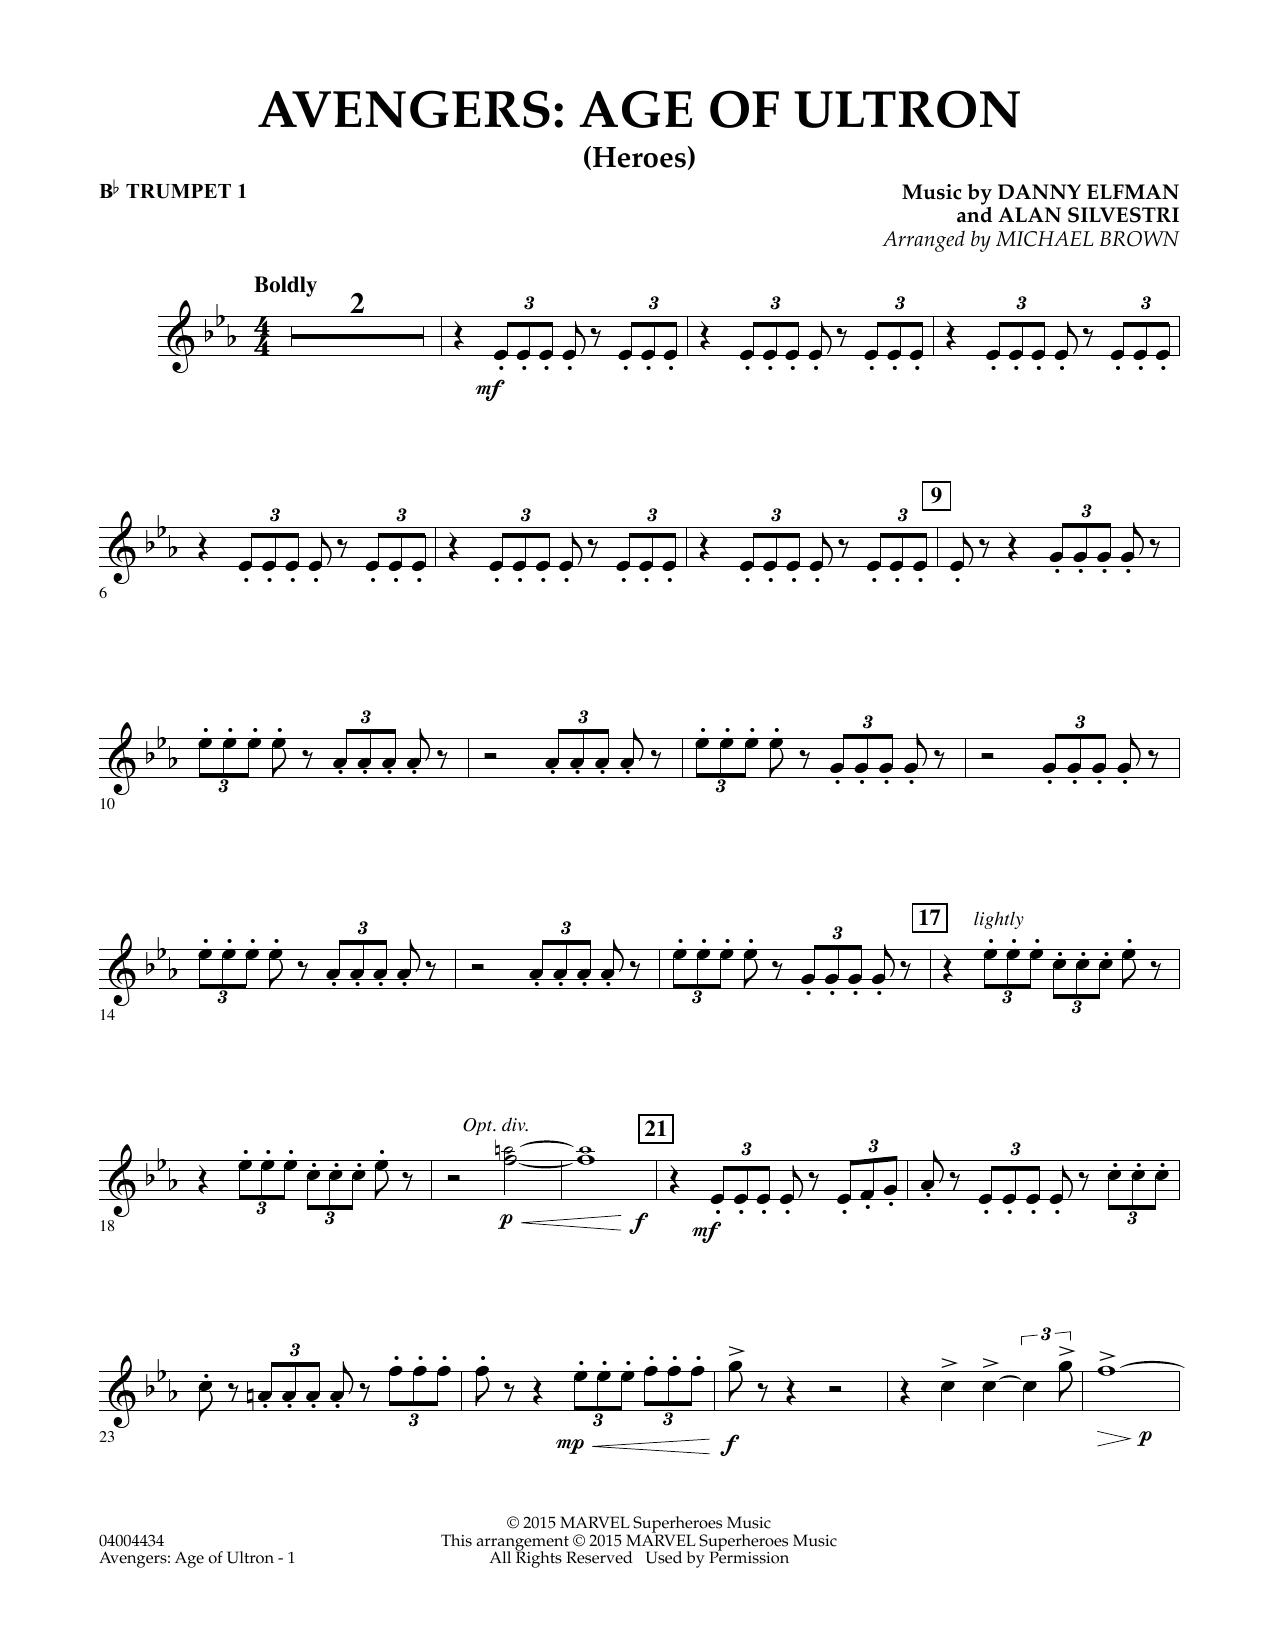 Michael Brown Avengers: The Age of Ultron (Main Theme) - Bb Trumpet 1 sheet music notes and chords. Download Printable PDF.